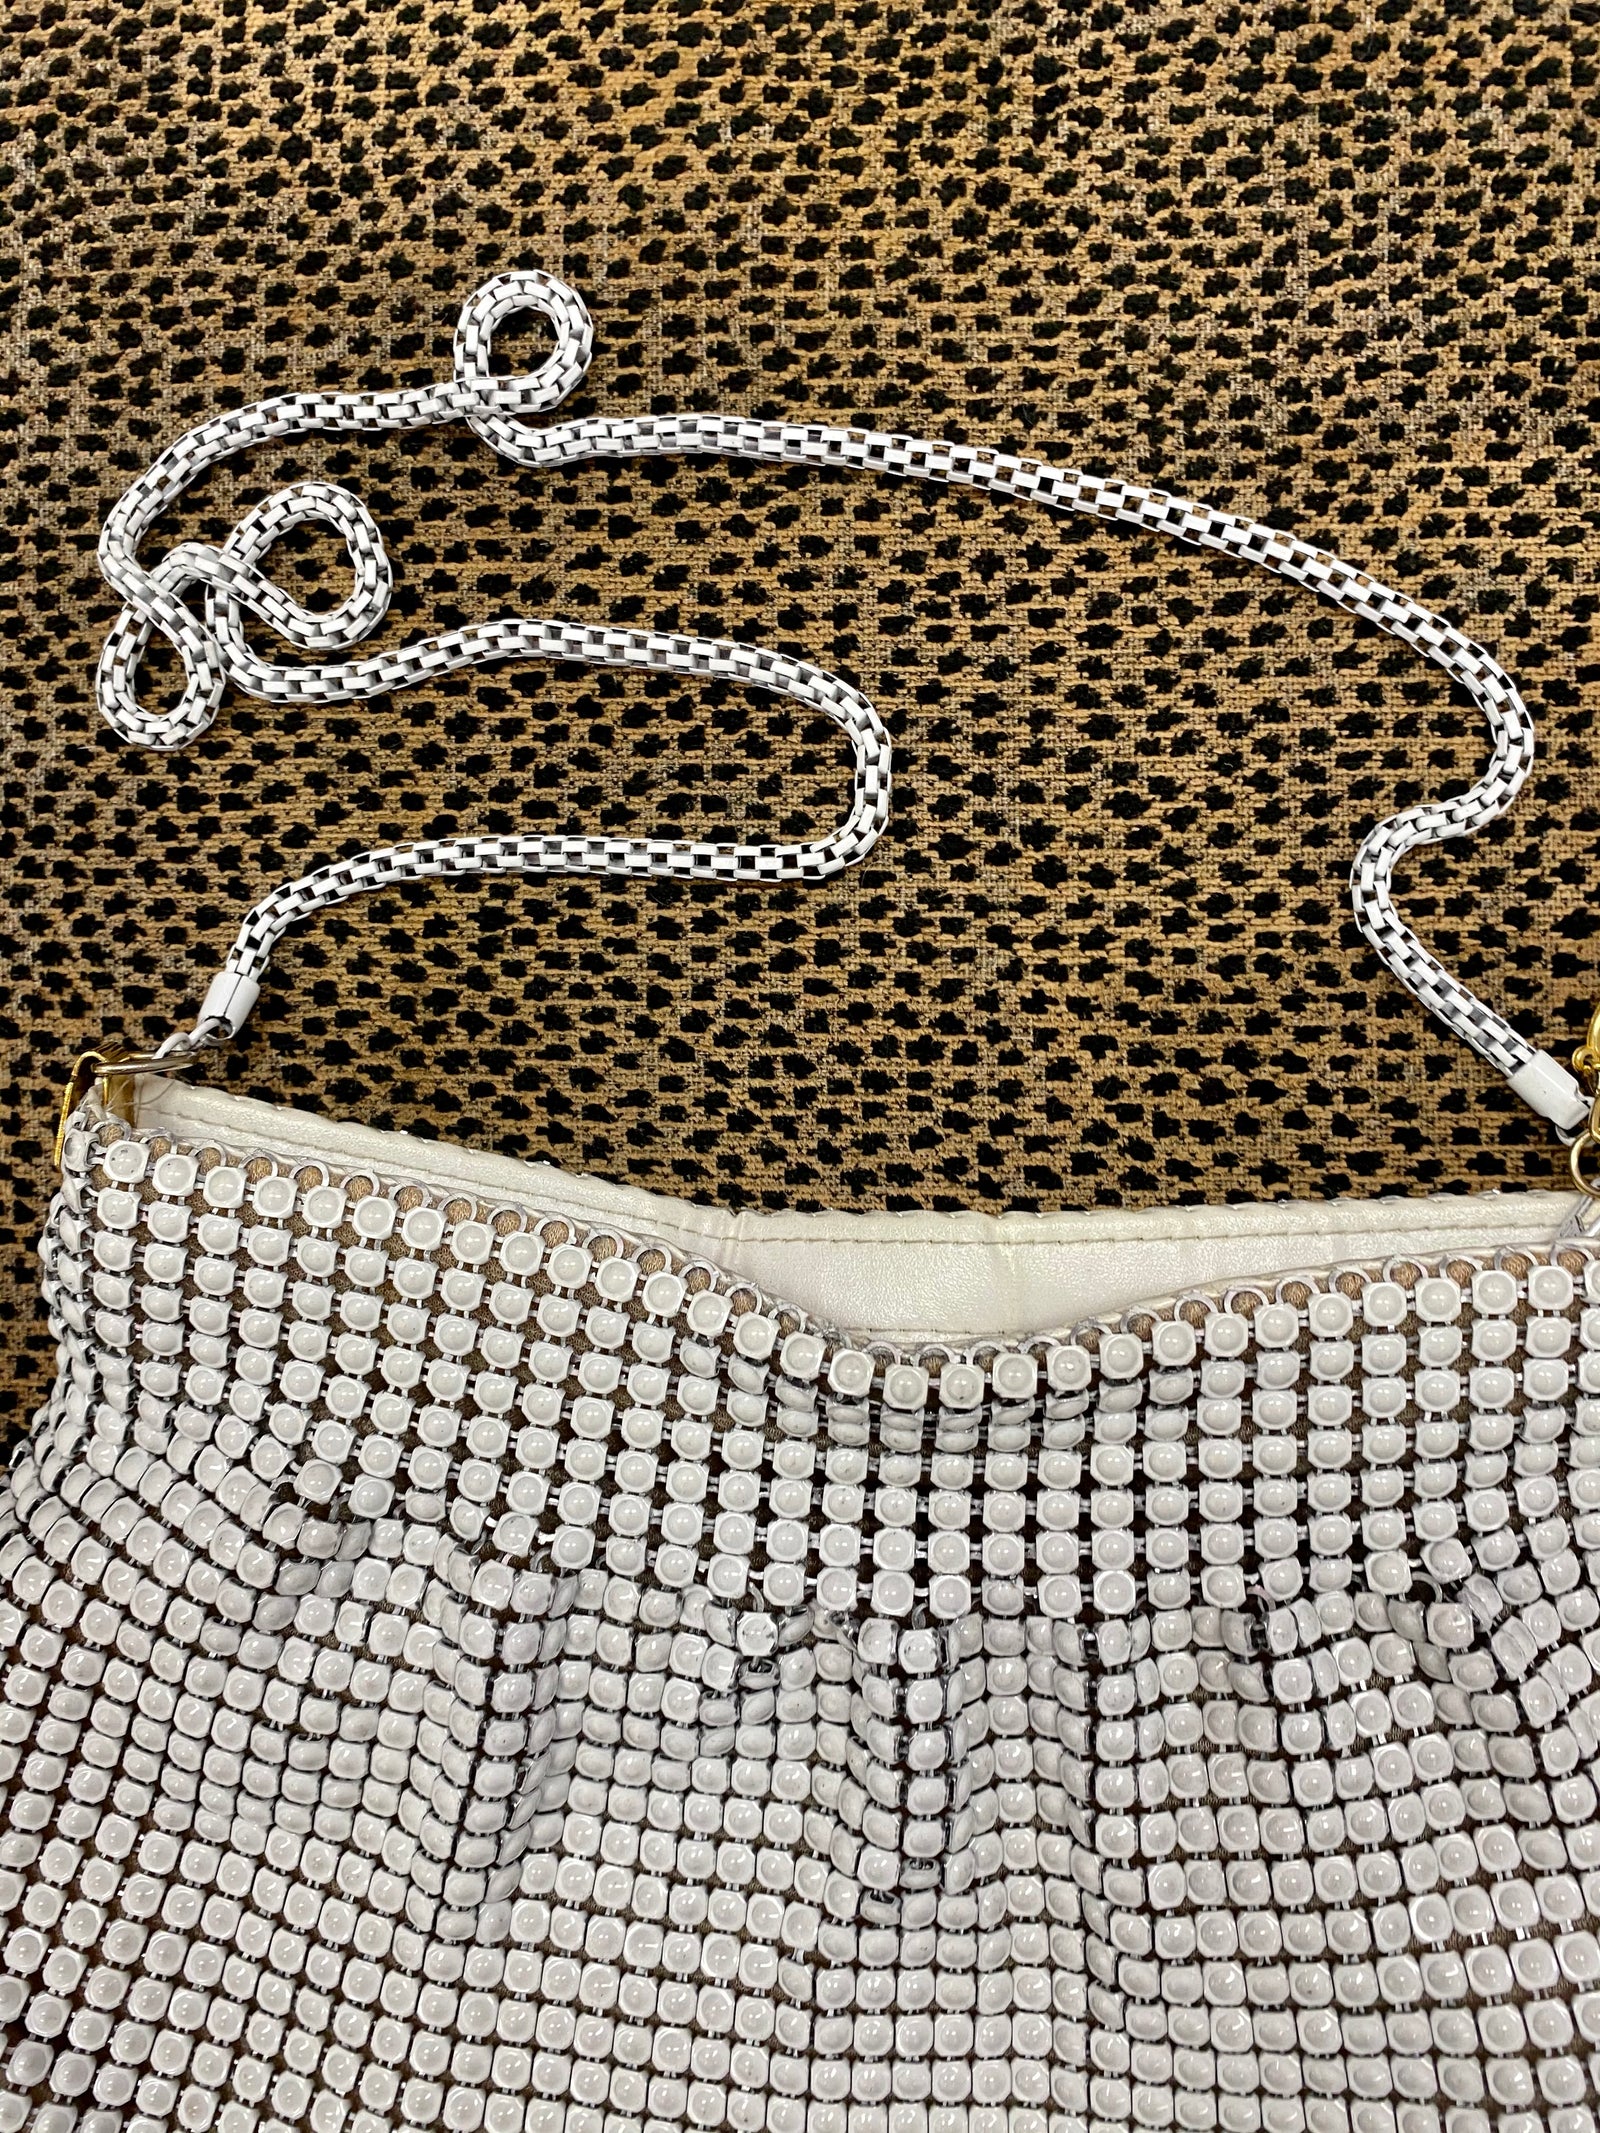 Vintage Chainlink Purse with Satin Lining